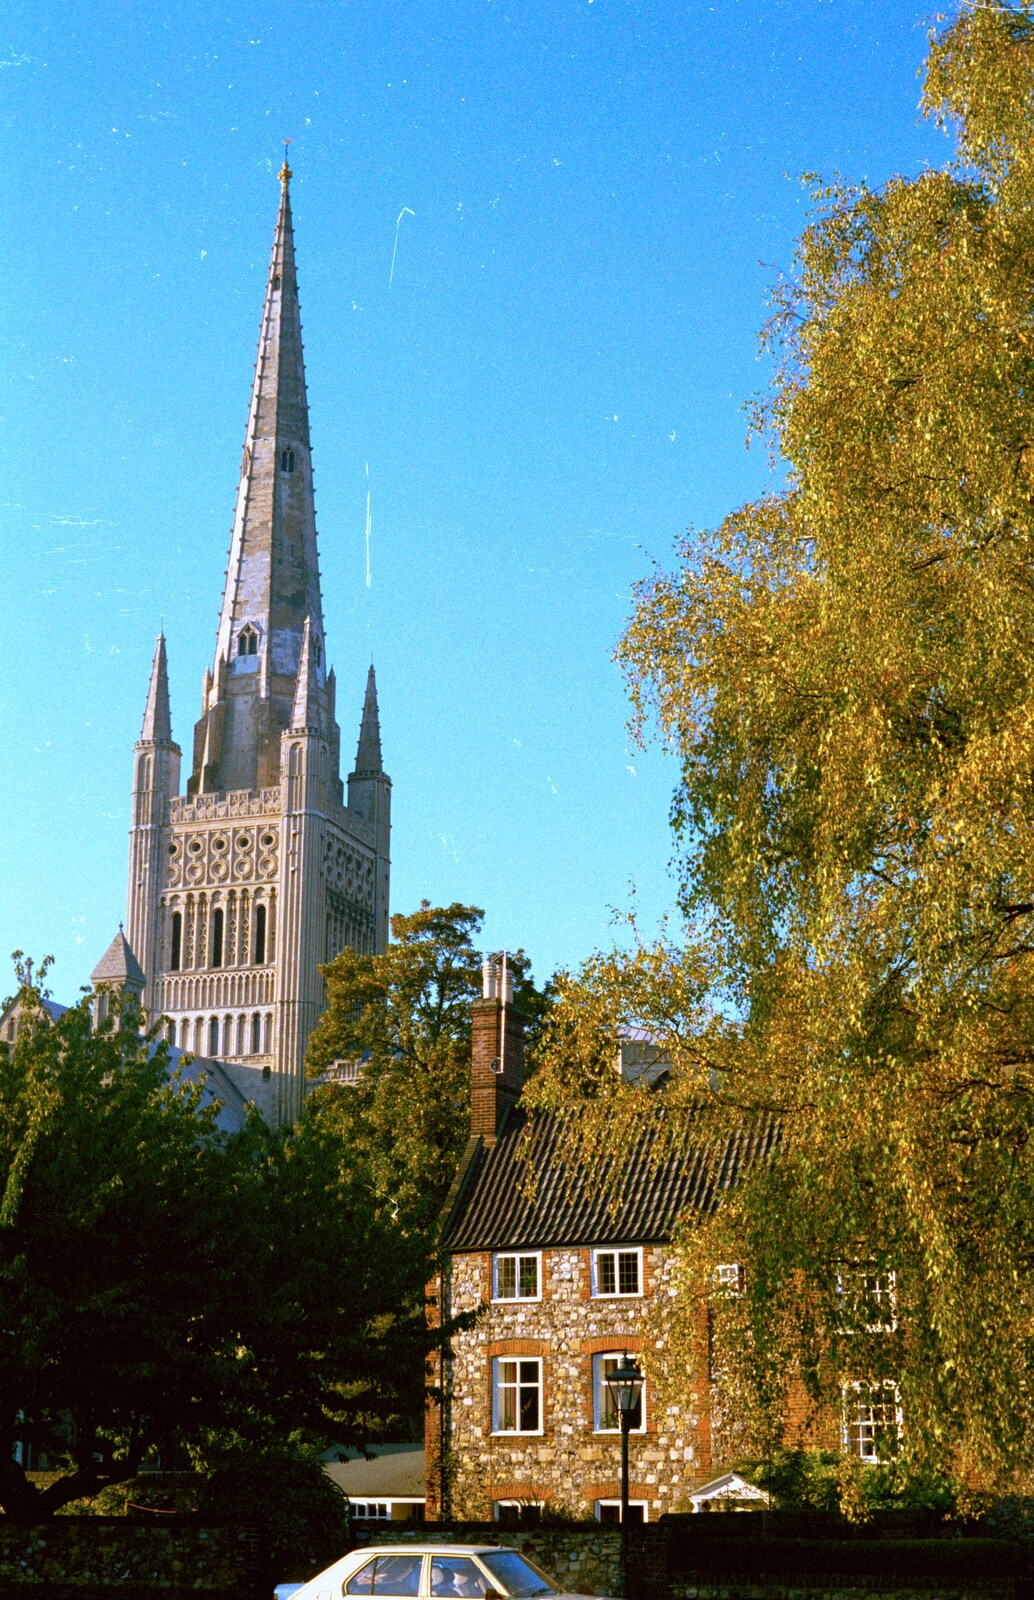 From Waterloo Station to Great Yarmouth, London and Norfolk - 20th September 1987: Norwich Cathedral, from the Close